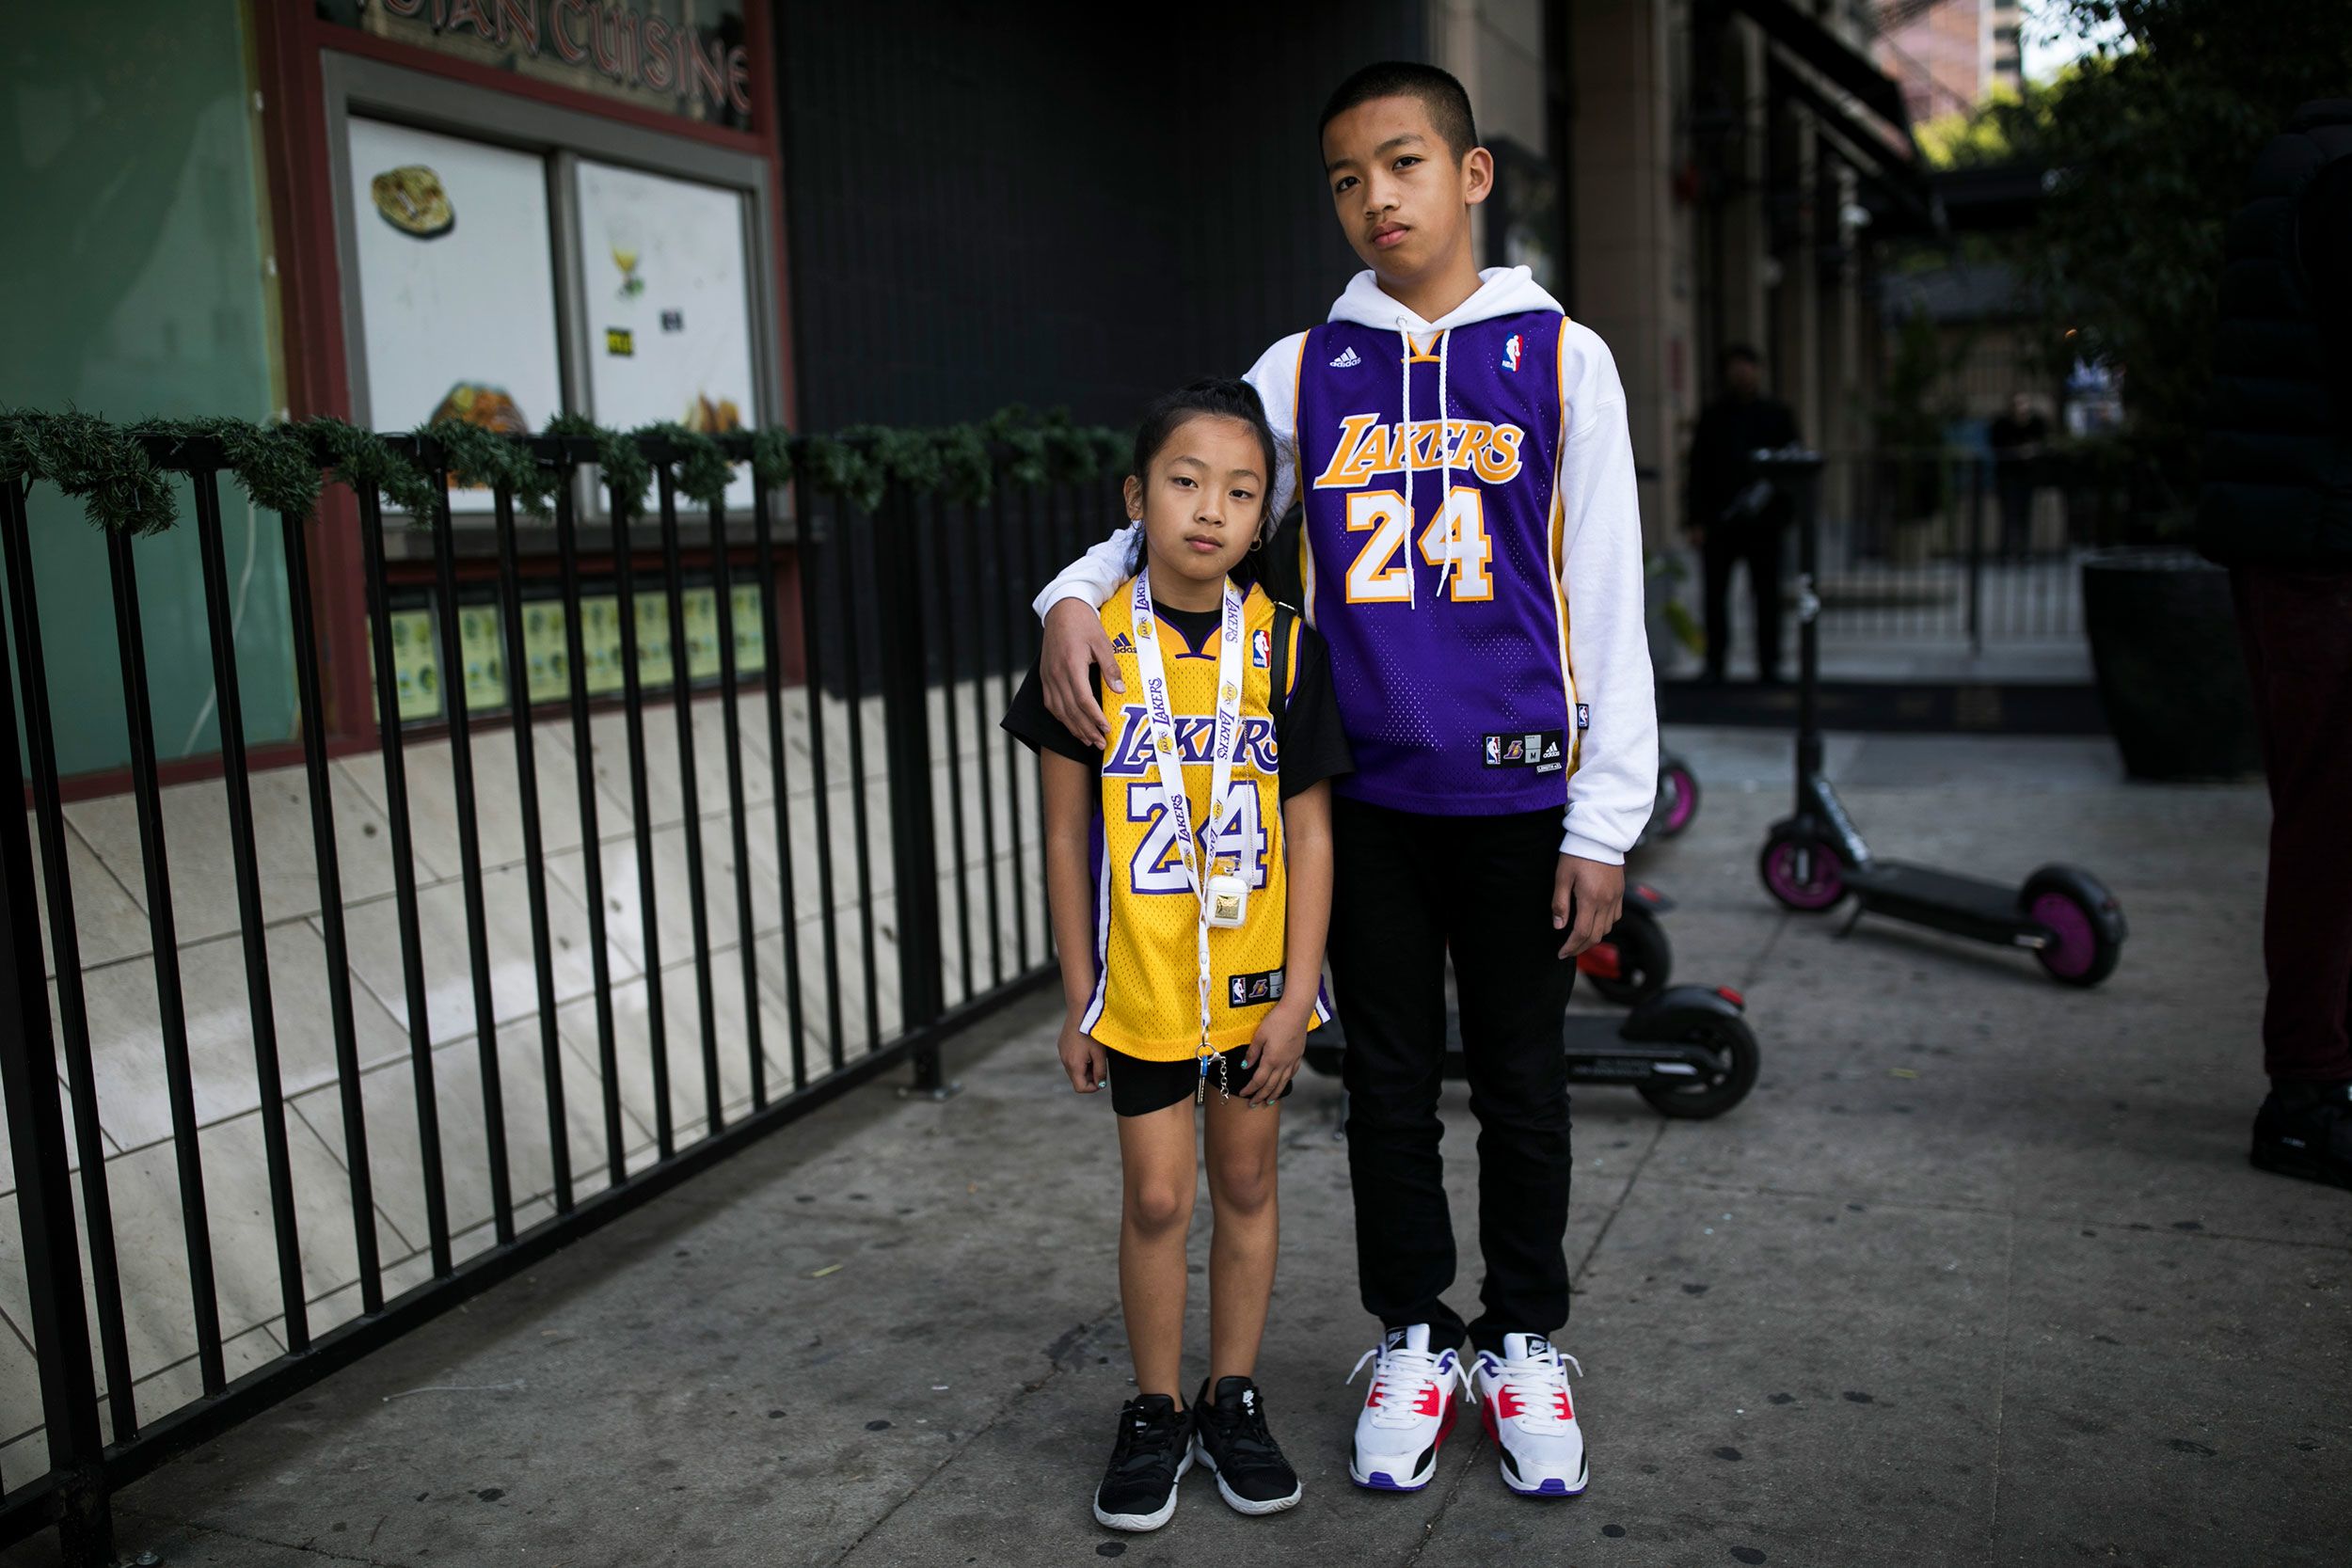 Kobe's gonna be with us forever': Fans honor Lakers legend with